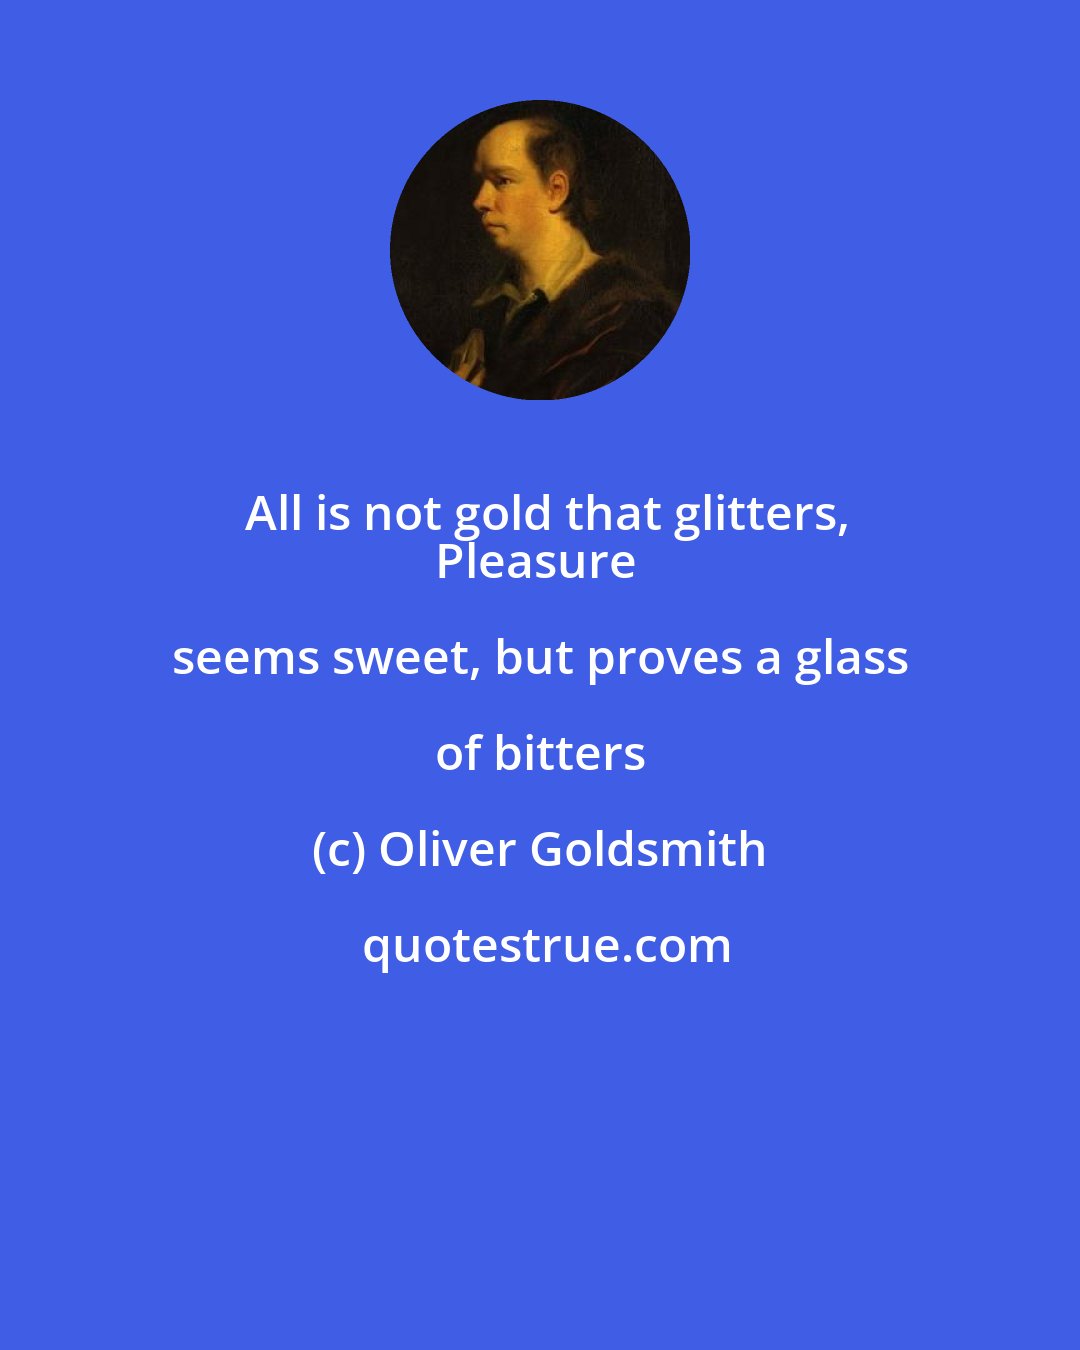 Oliver Goldsmith: All is not gold that glitters,
Pleasure seems sweet, but proves a glass of bitters